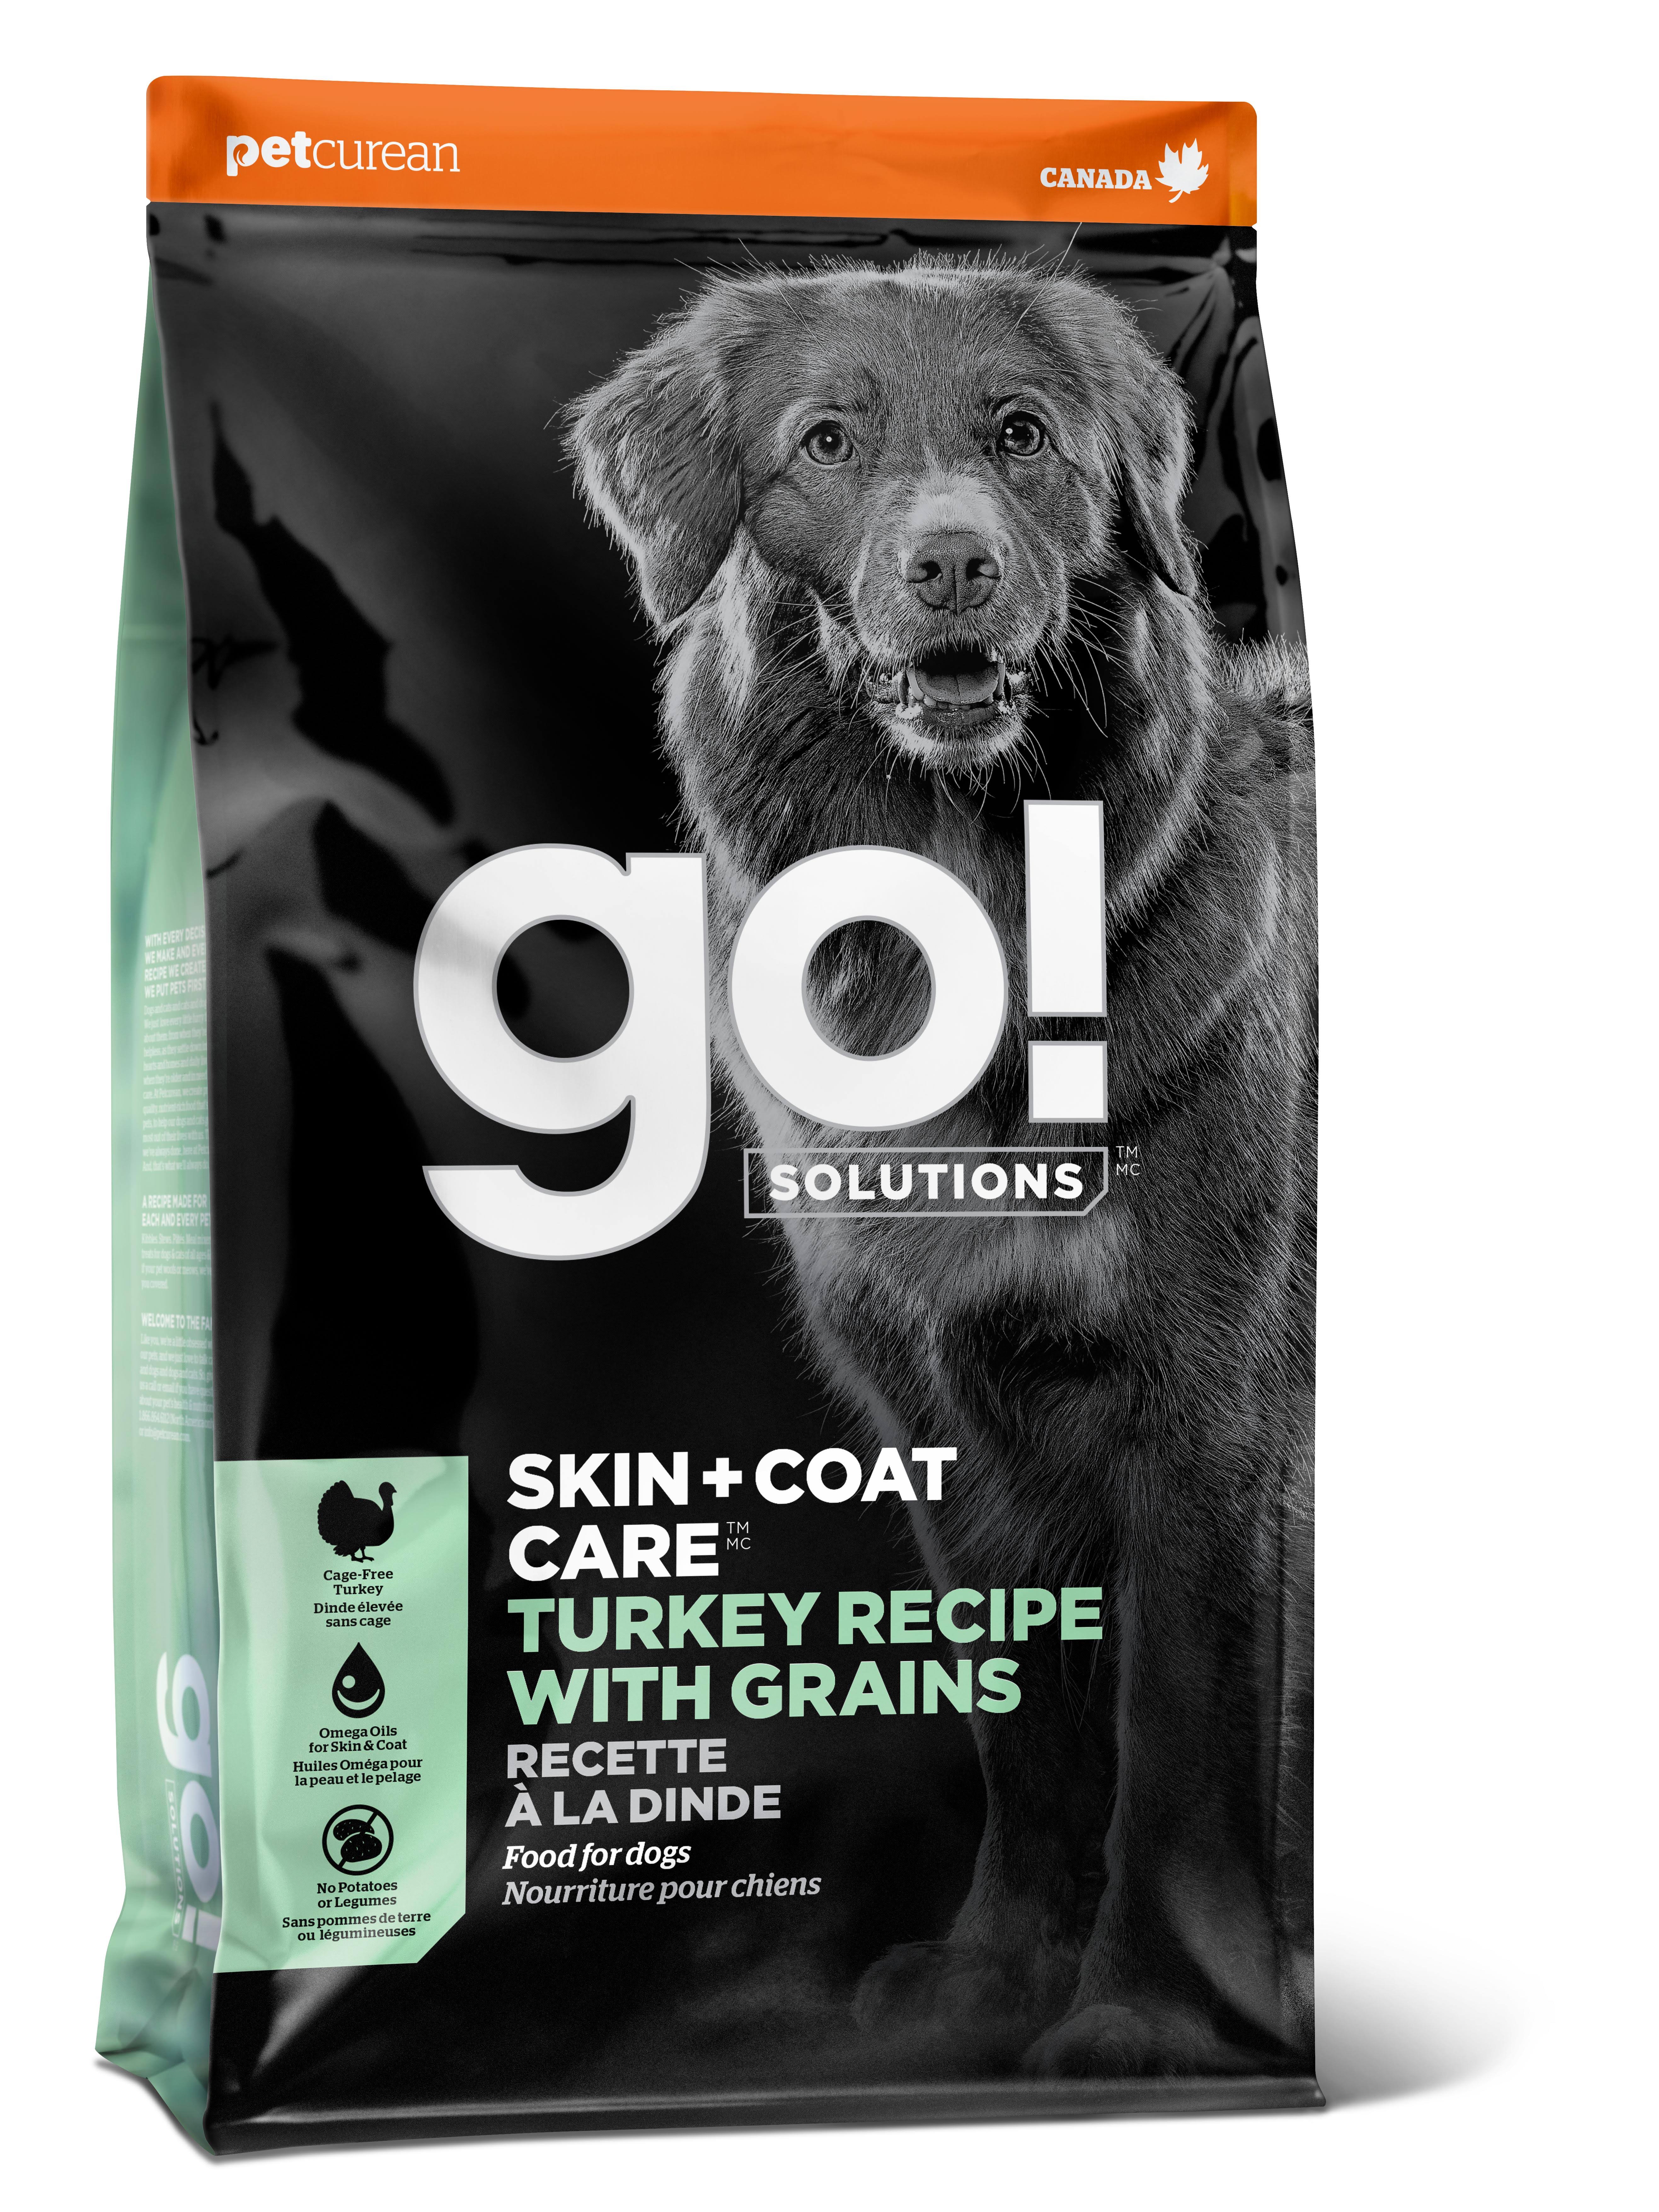 Go! Solutions Skin + Coat Care Turkey with Grains Dry Dog Food, 25-lb